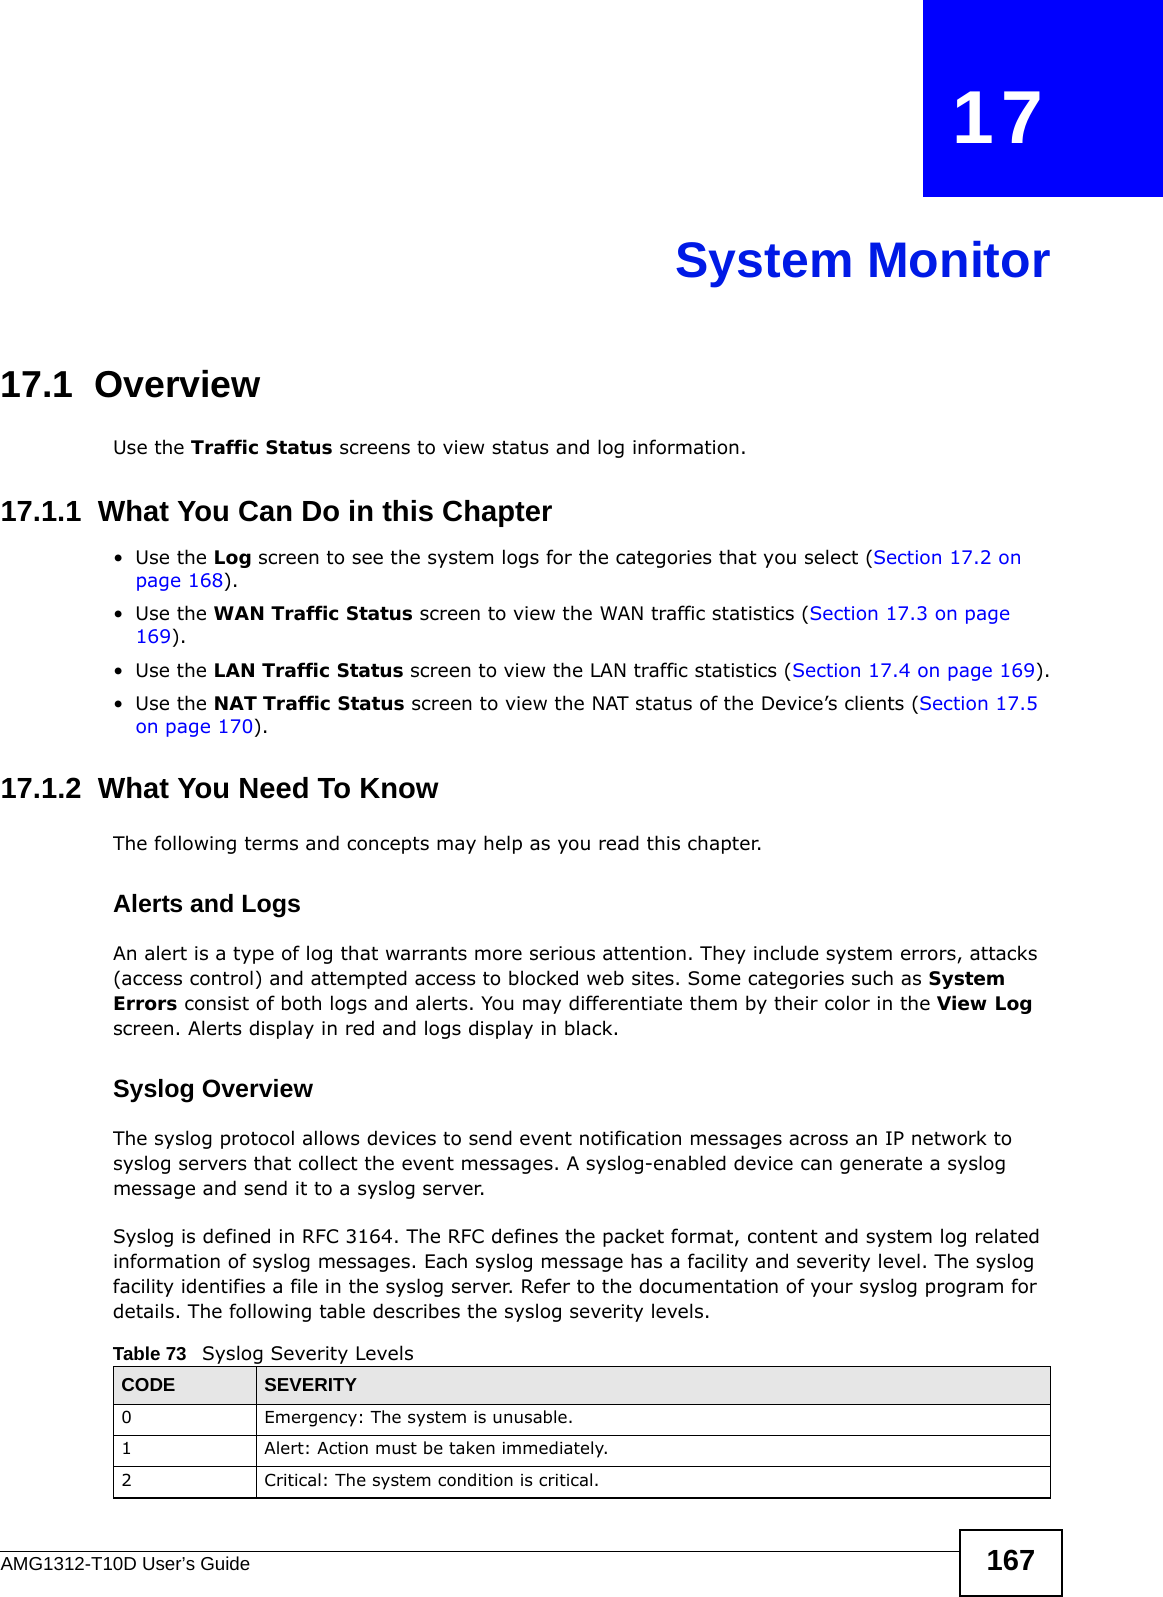 AMG1312-T10D User’s Guide 167CHAPTER   17System Monitor17.1  OverviewUse the Traffic Status screens to view status and log information. 17.1.1  What You Can Do in this Chapter•Use the Log screen to see the system logs for the categories that you select (Section 17.2 on page 168).•Use the WAN Traffic Status screen to view the WAN traffic statistics (Section 17.3 on page 169).•Use the LAN Traffic Status screen to view the LAN traffic statistics (Section 17.4 on page 169).•Use the NAT Traffic Status screen to view the NAT status of the Device’s clients (Section 17.5 on page 170).17.1.2  What You Need To KnowThe following terms and concepts may help as you read this chapter.Alerts and LogsAn alert is a type of log that warrants more serious attention. They include system errors, attacks (access control) and attempted access to blocked web sites. Some categories such as System Errors consist of both logs and alerts. You may differentiate them by their color in the View Log screen. Alerts display in red and logs display in black.Syslog Overview The syslog protocol allows devices to send event notification messages across an IP network to syslog servers that collect the event messages. A syslog-enabled device can generate a syslog message and send it to a syslog server.Syslog is defined in RFC 3164. The RFC defines the packet format, content and system log related information of syslog messages. Each syslog message has a facility and severity level. The syslog facility identifies a file in the syslog server. Refer to the documentation of your syslog program for details. The following table describes the syslog severity levels. Table 73   Syslog Severity LevelsCODE SEVERITY0 Emergency: The system is unusable.1 Alert: Action must be taken immediately.2 Critical: The system condition is critical.